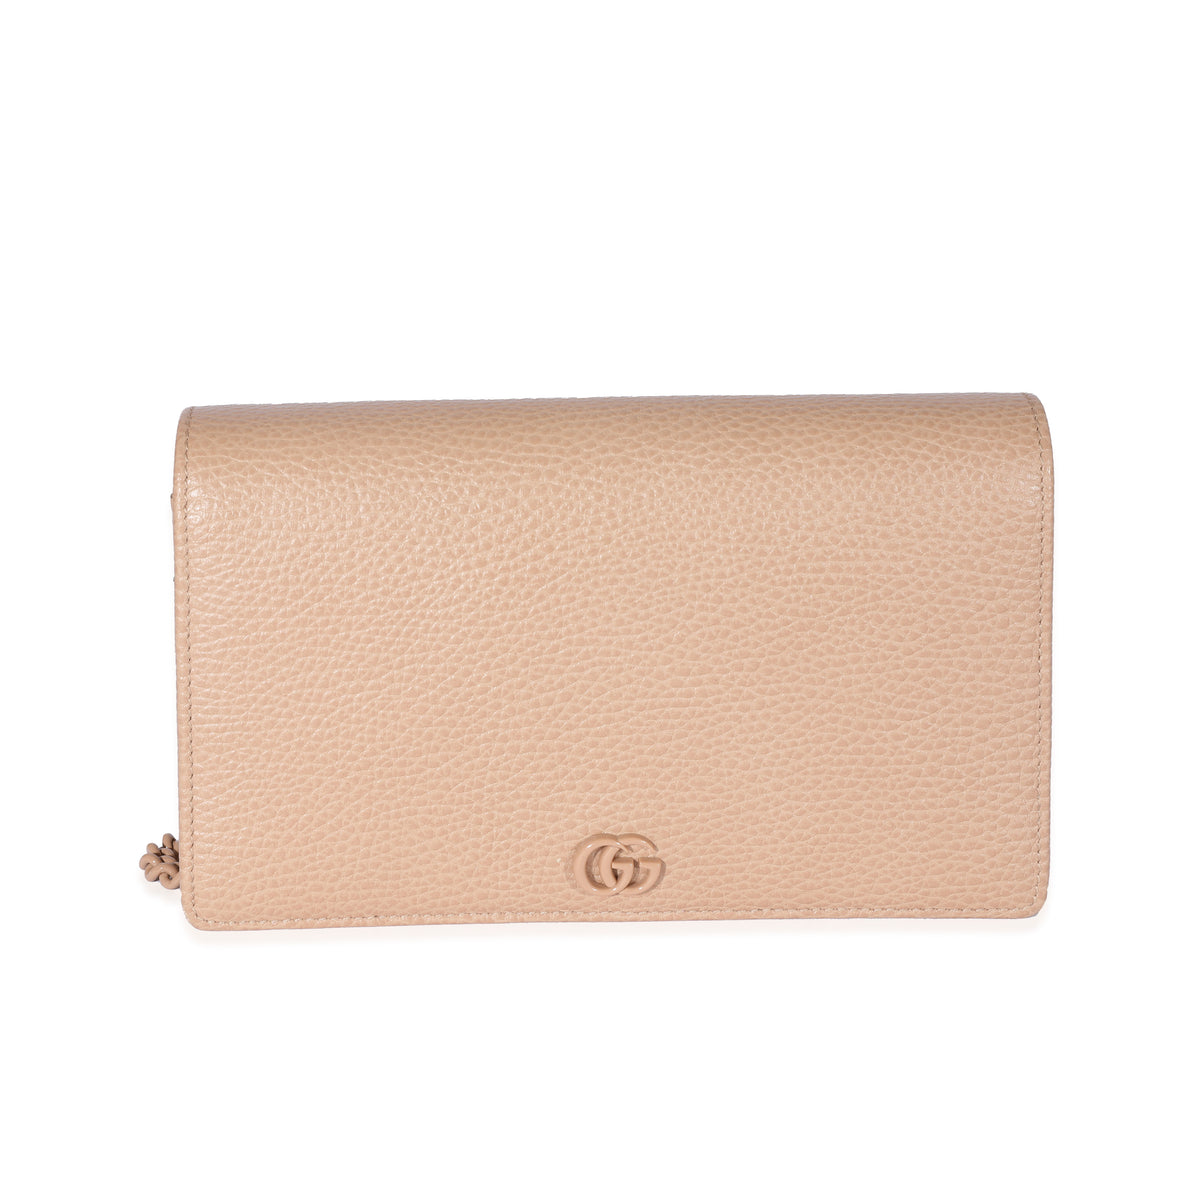 Gucci Beige Leather GG Marmont Wallet On Chain